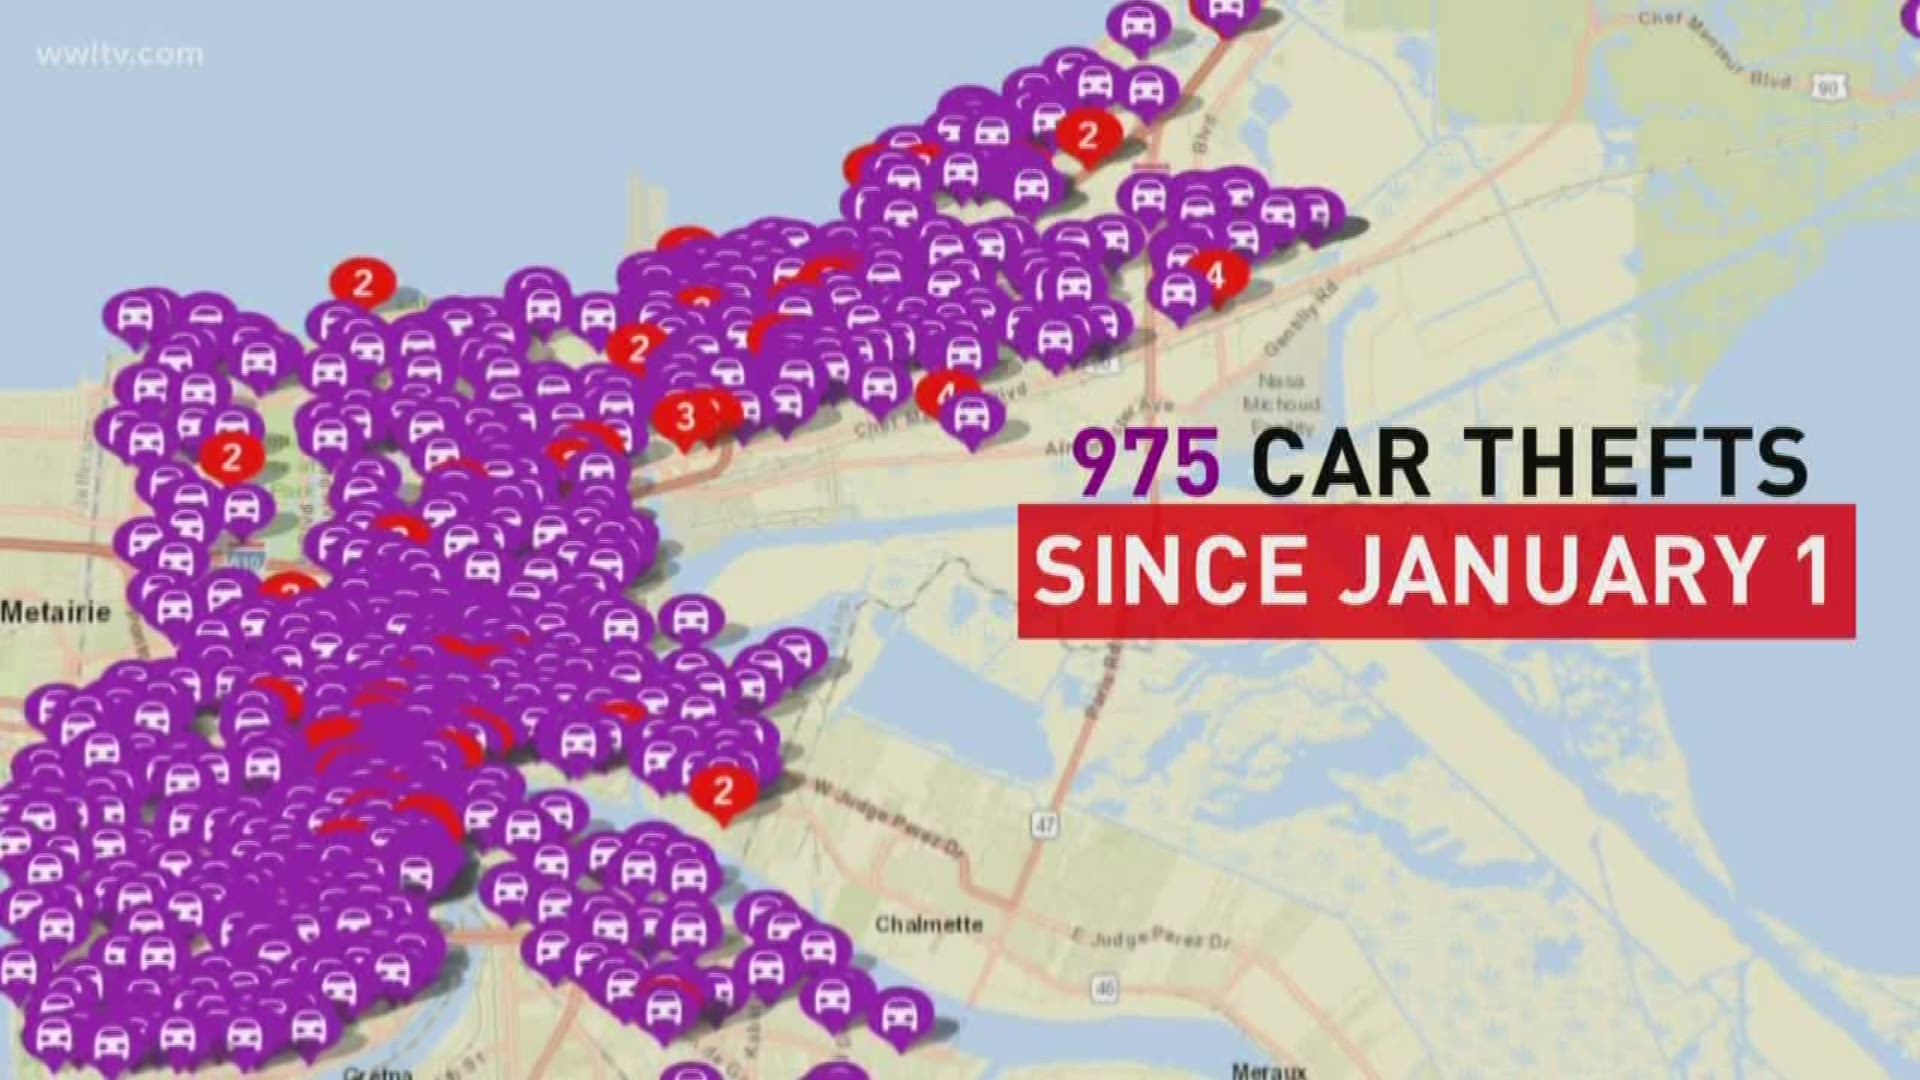 On average, 9 cars stolen per day in New Orleans in 2019 so far